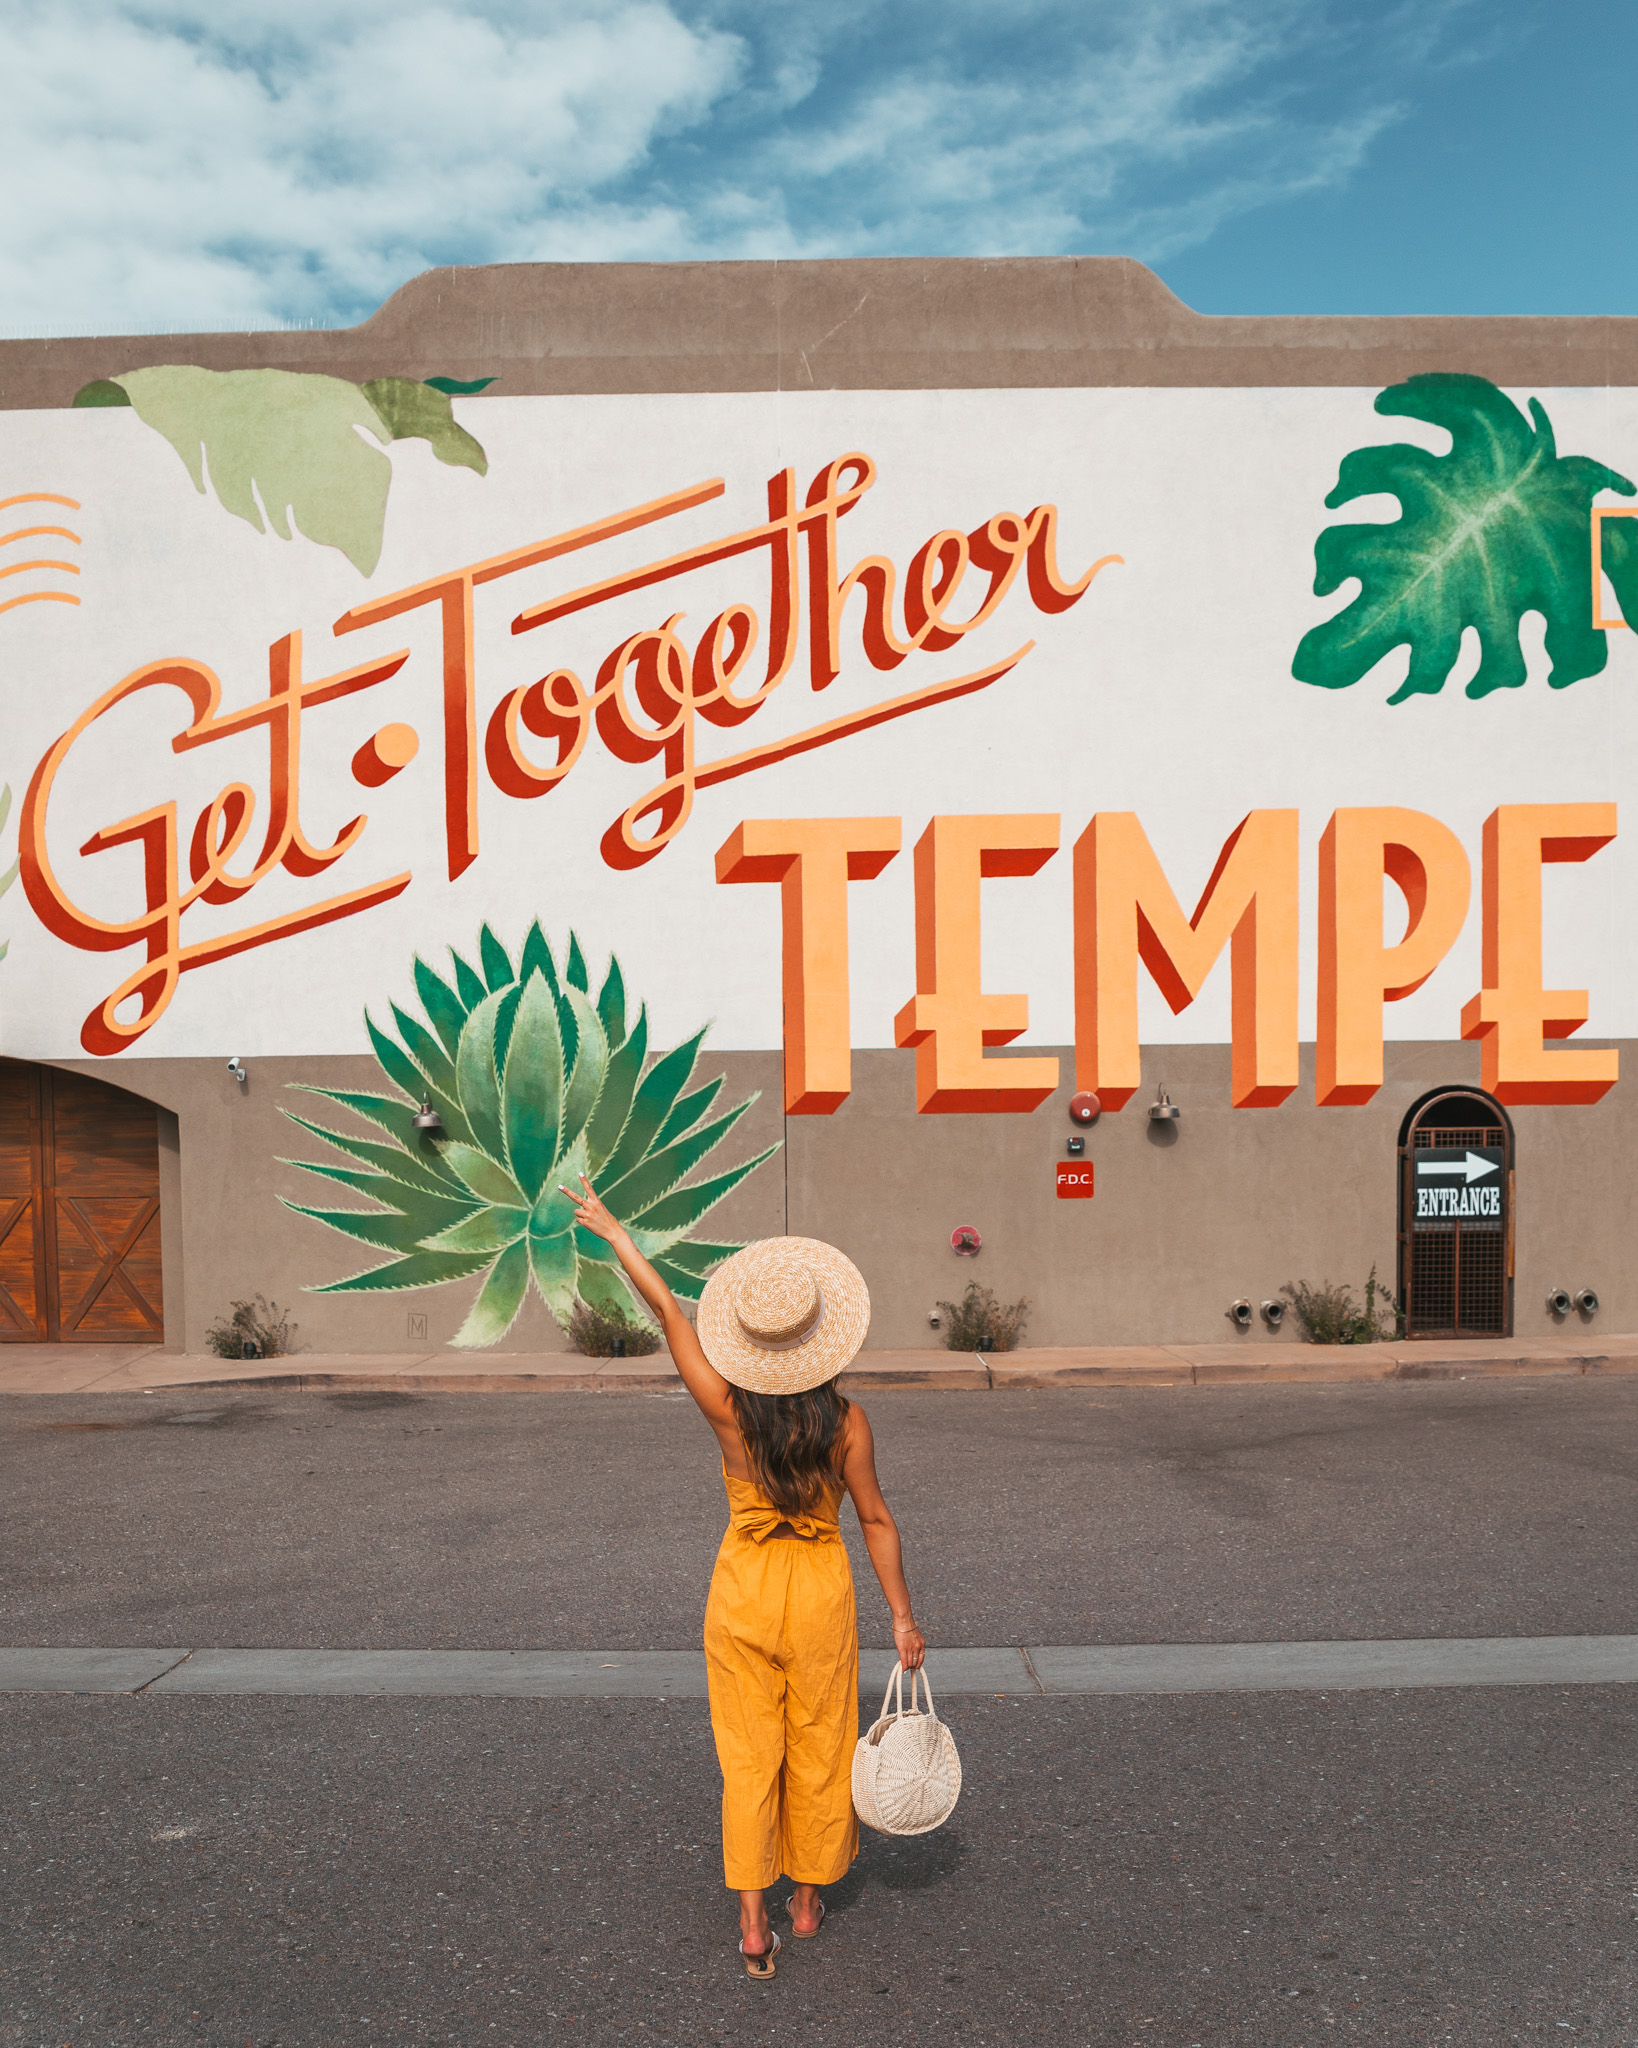 Get Together Tempe mural 